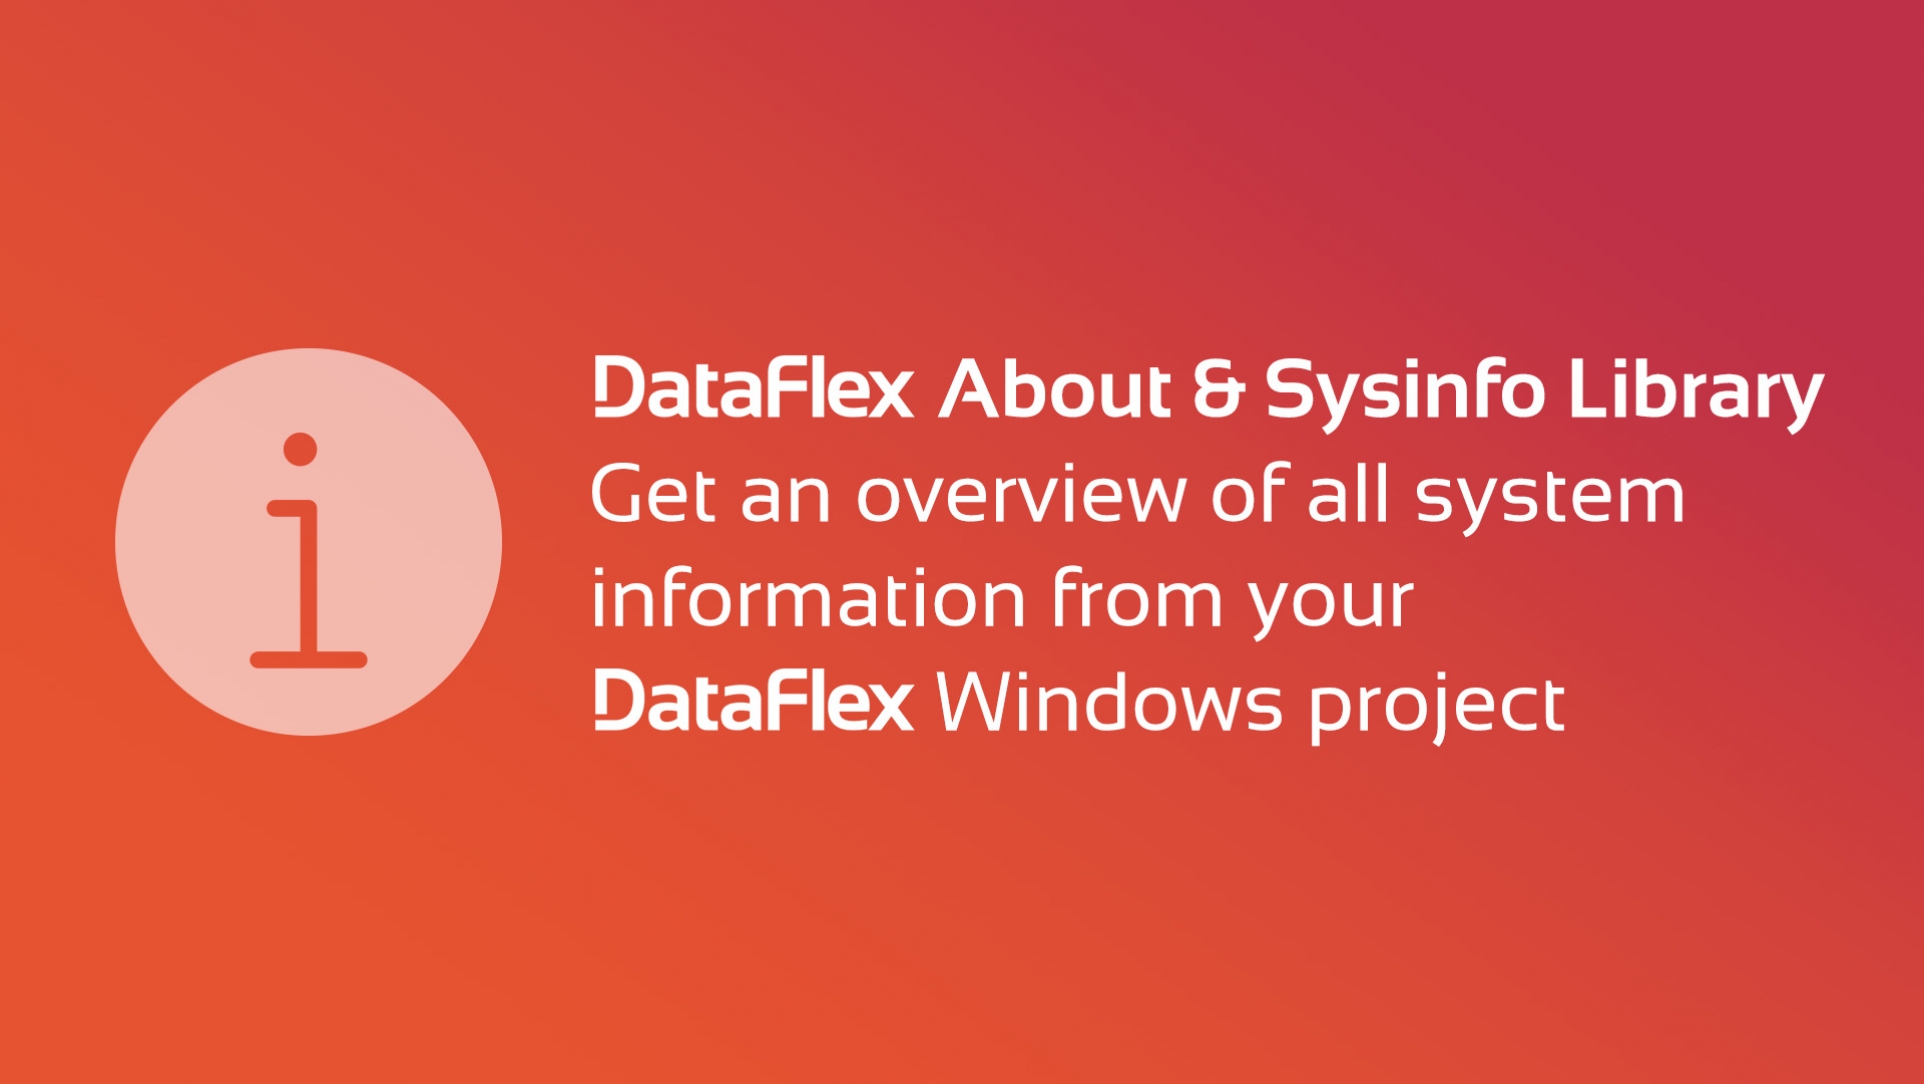 DataFlex About & Sysinfo Library now available for DataFlex 2021 and 2022